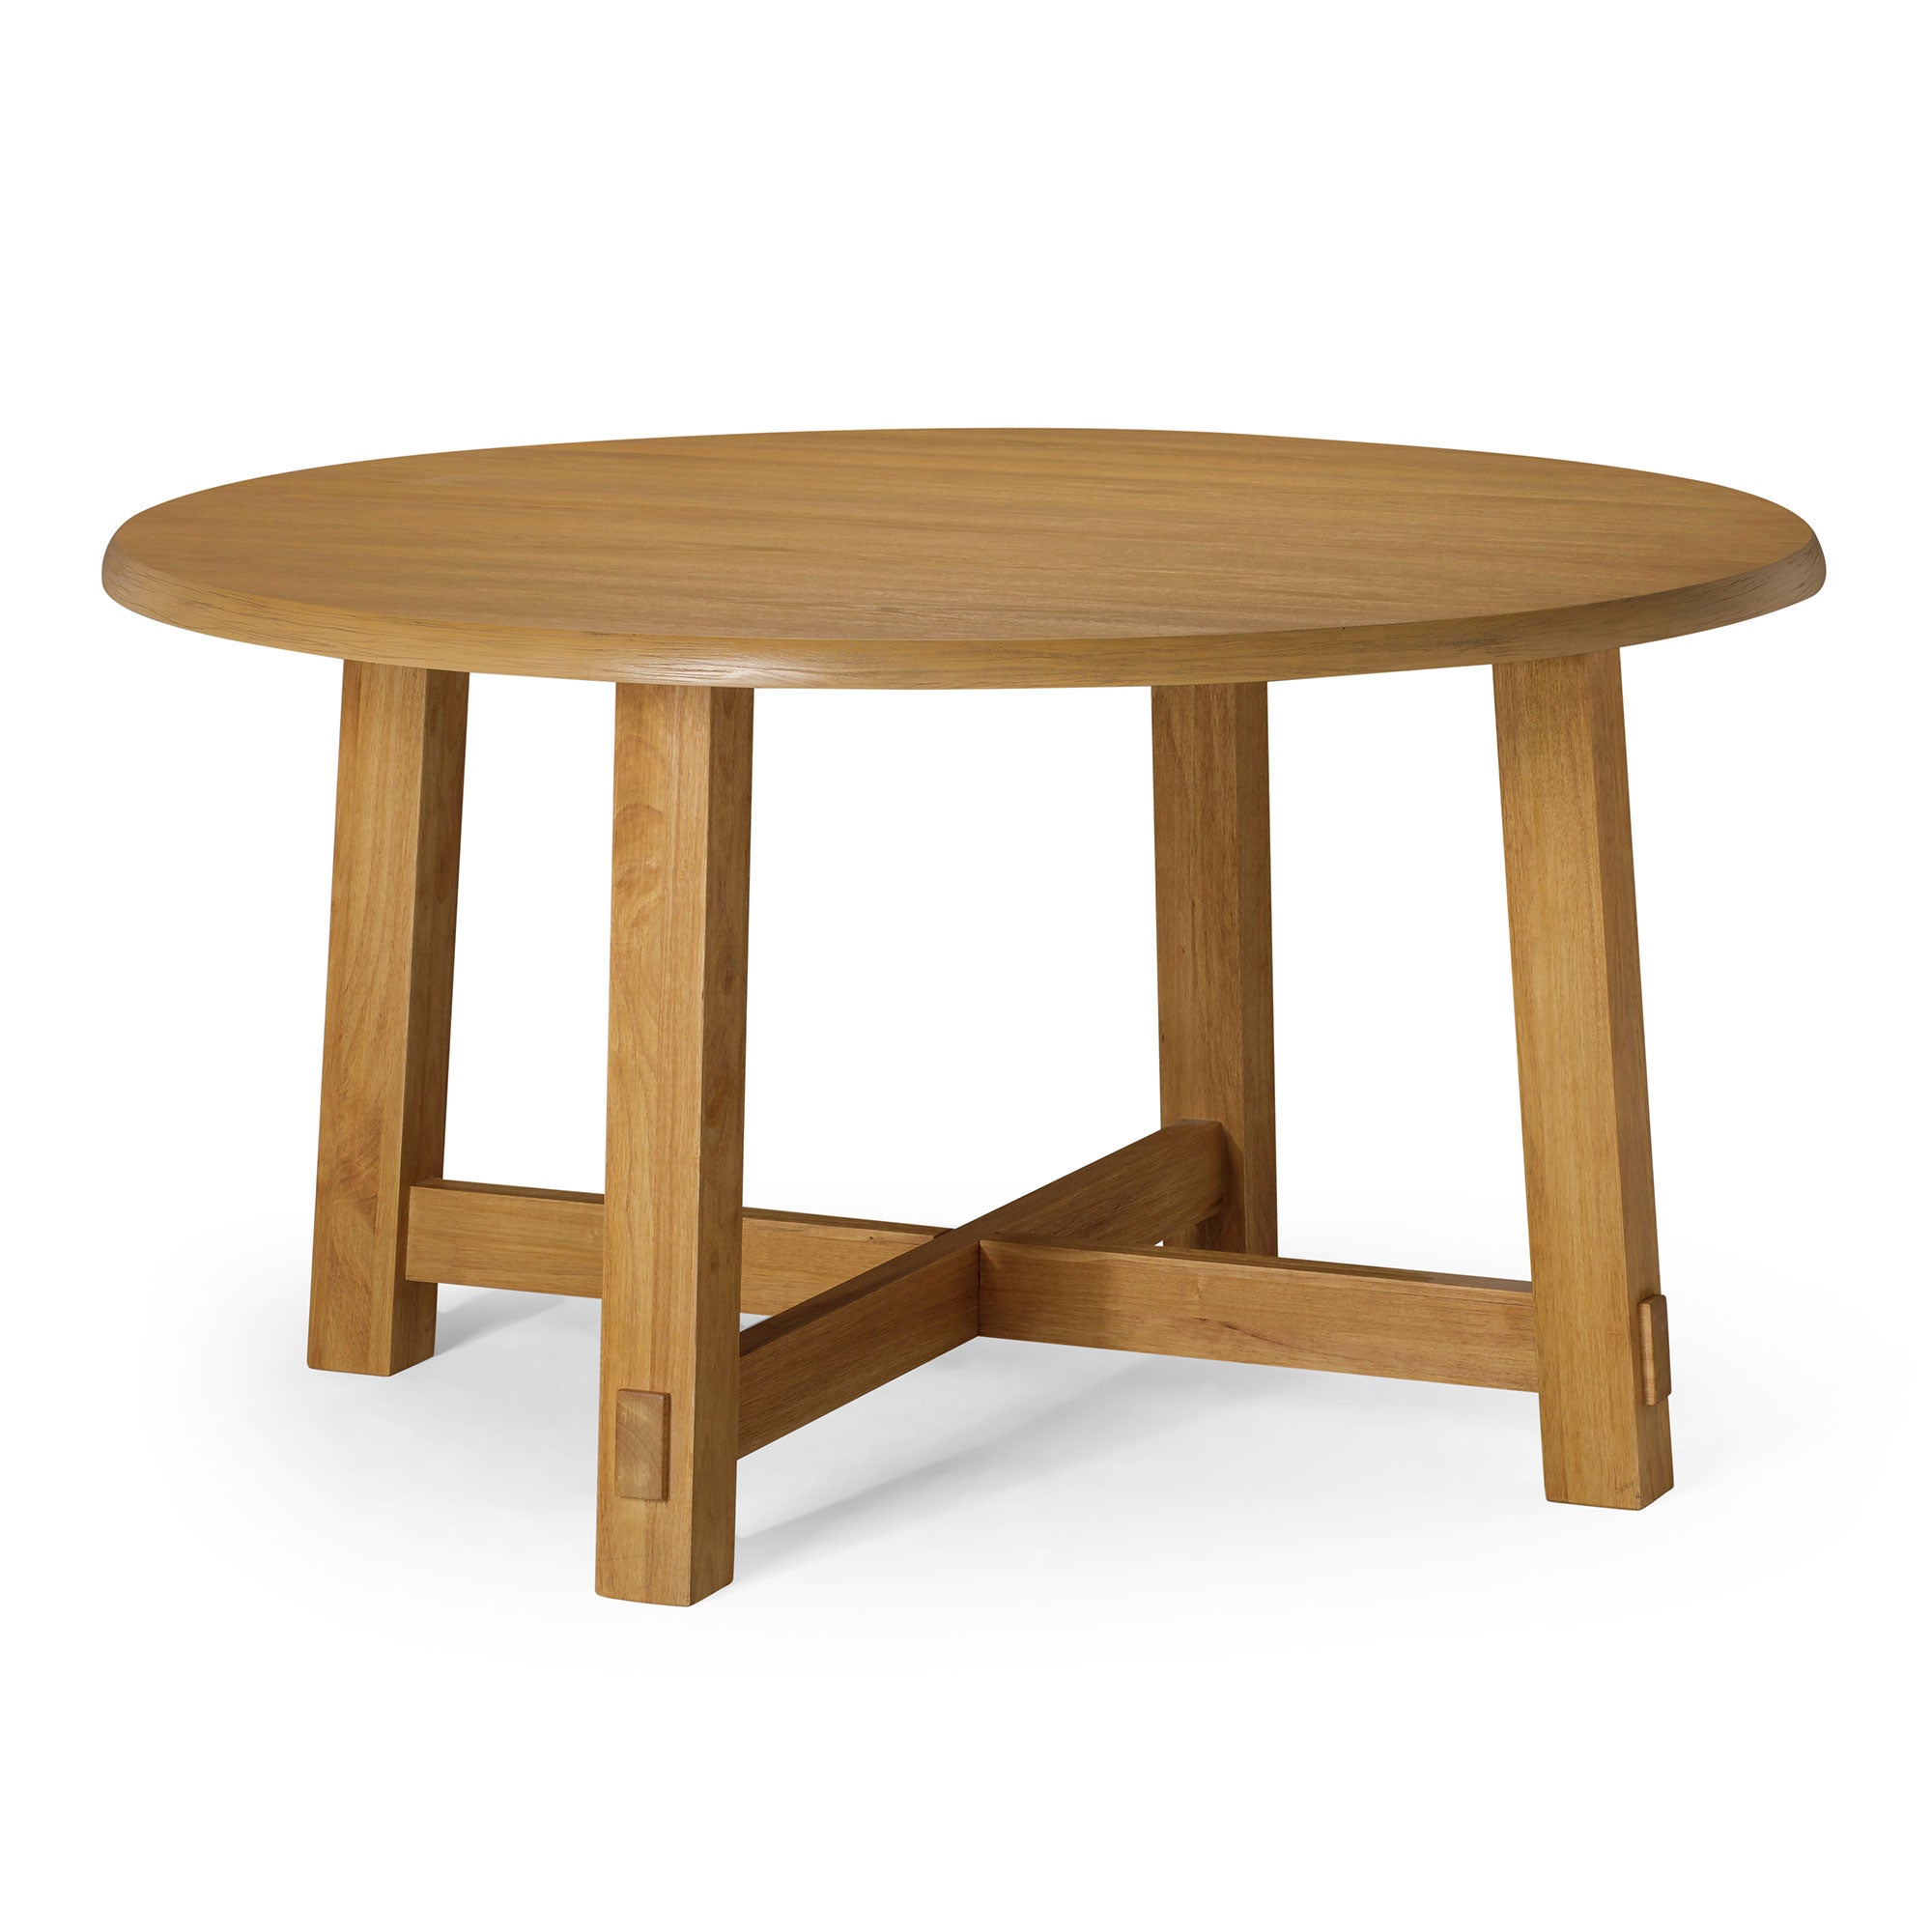 Maven-Lane-Sasha-Round-Wooden-Dining-Table-in-Weathered-Natural-Finish-Kitchen-&-Dining-Room-Tables